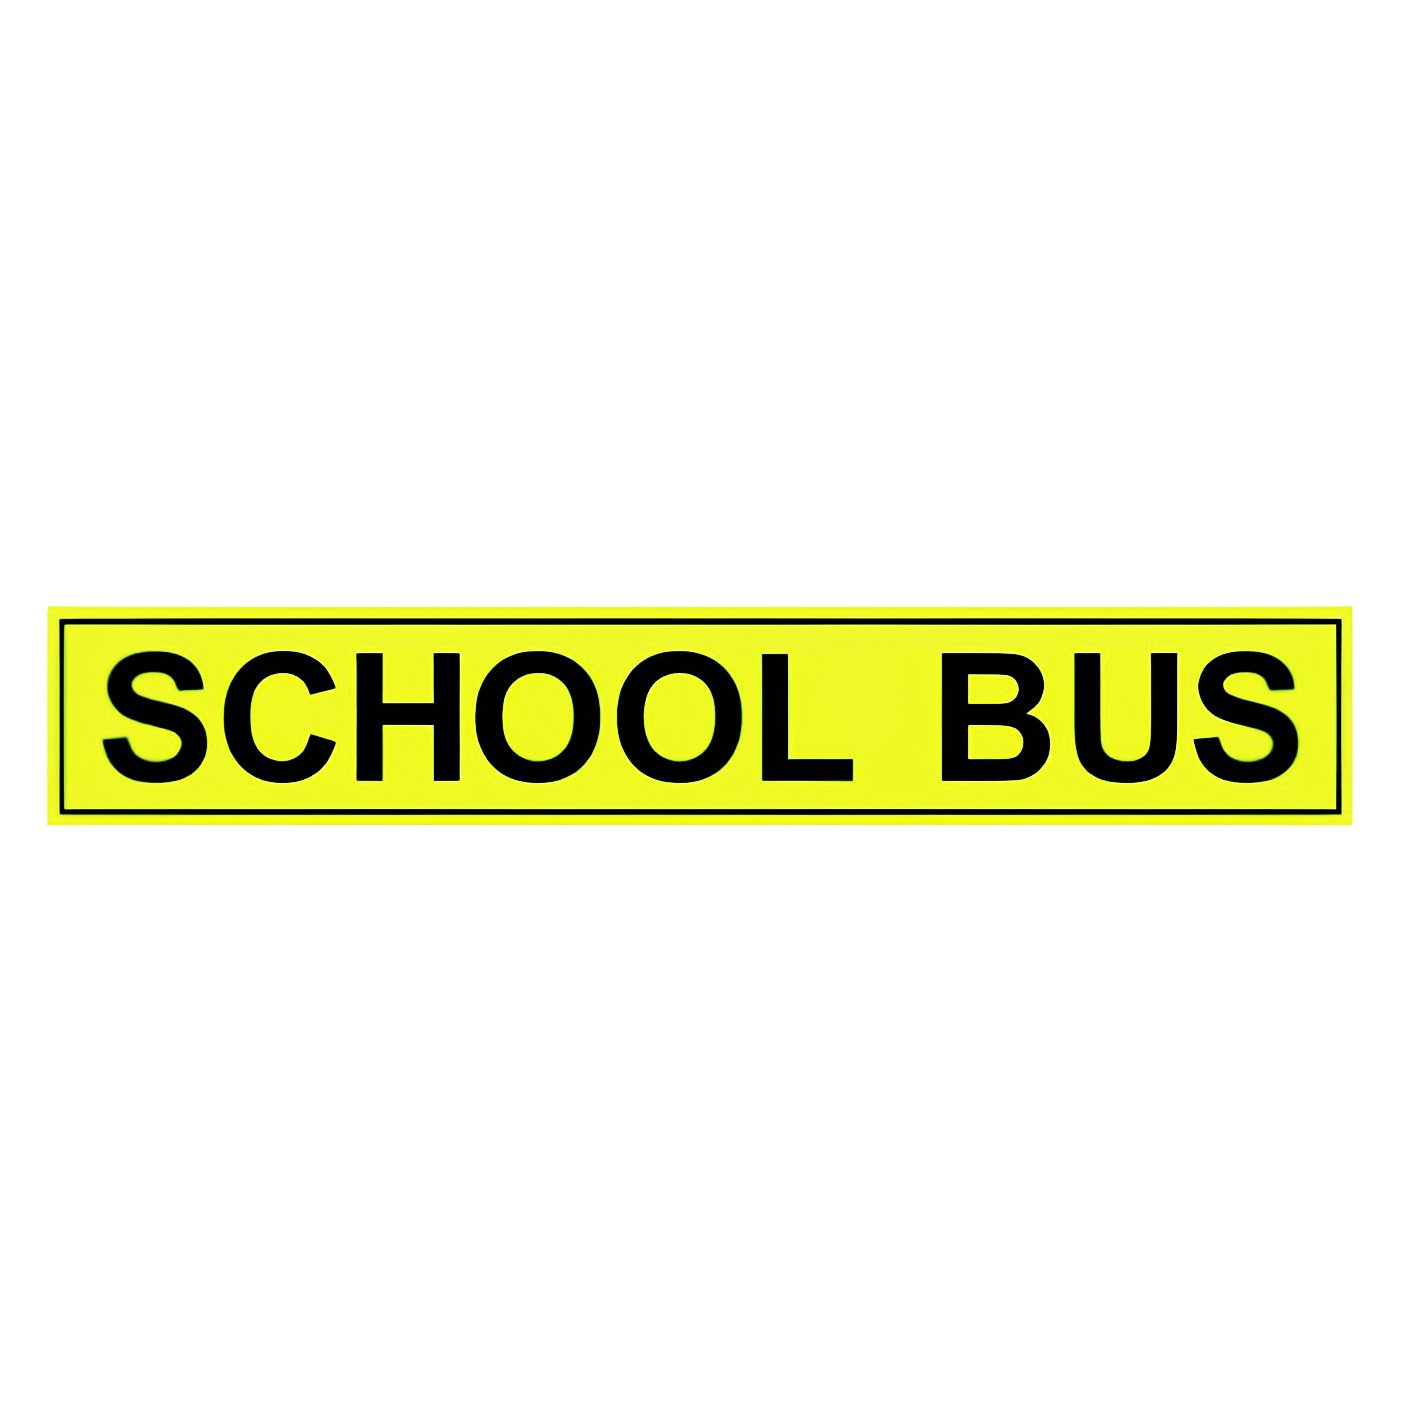 School Bus Sign – small, standard height lettering, 900mm x 150mm. Useful for small to medium sized school buses such as Toyota HiAce Commuter, Mitsubishi Rosa, Toyota Coaster. It is also used for some dual front windscreen buses such as Yutong and King Long.